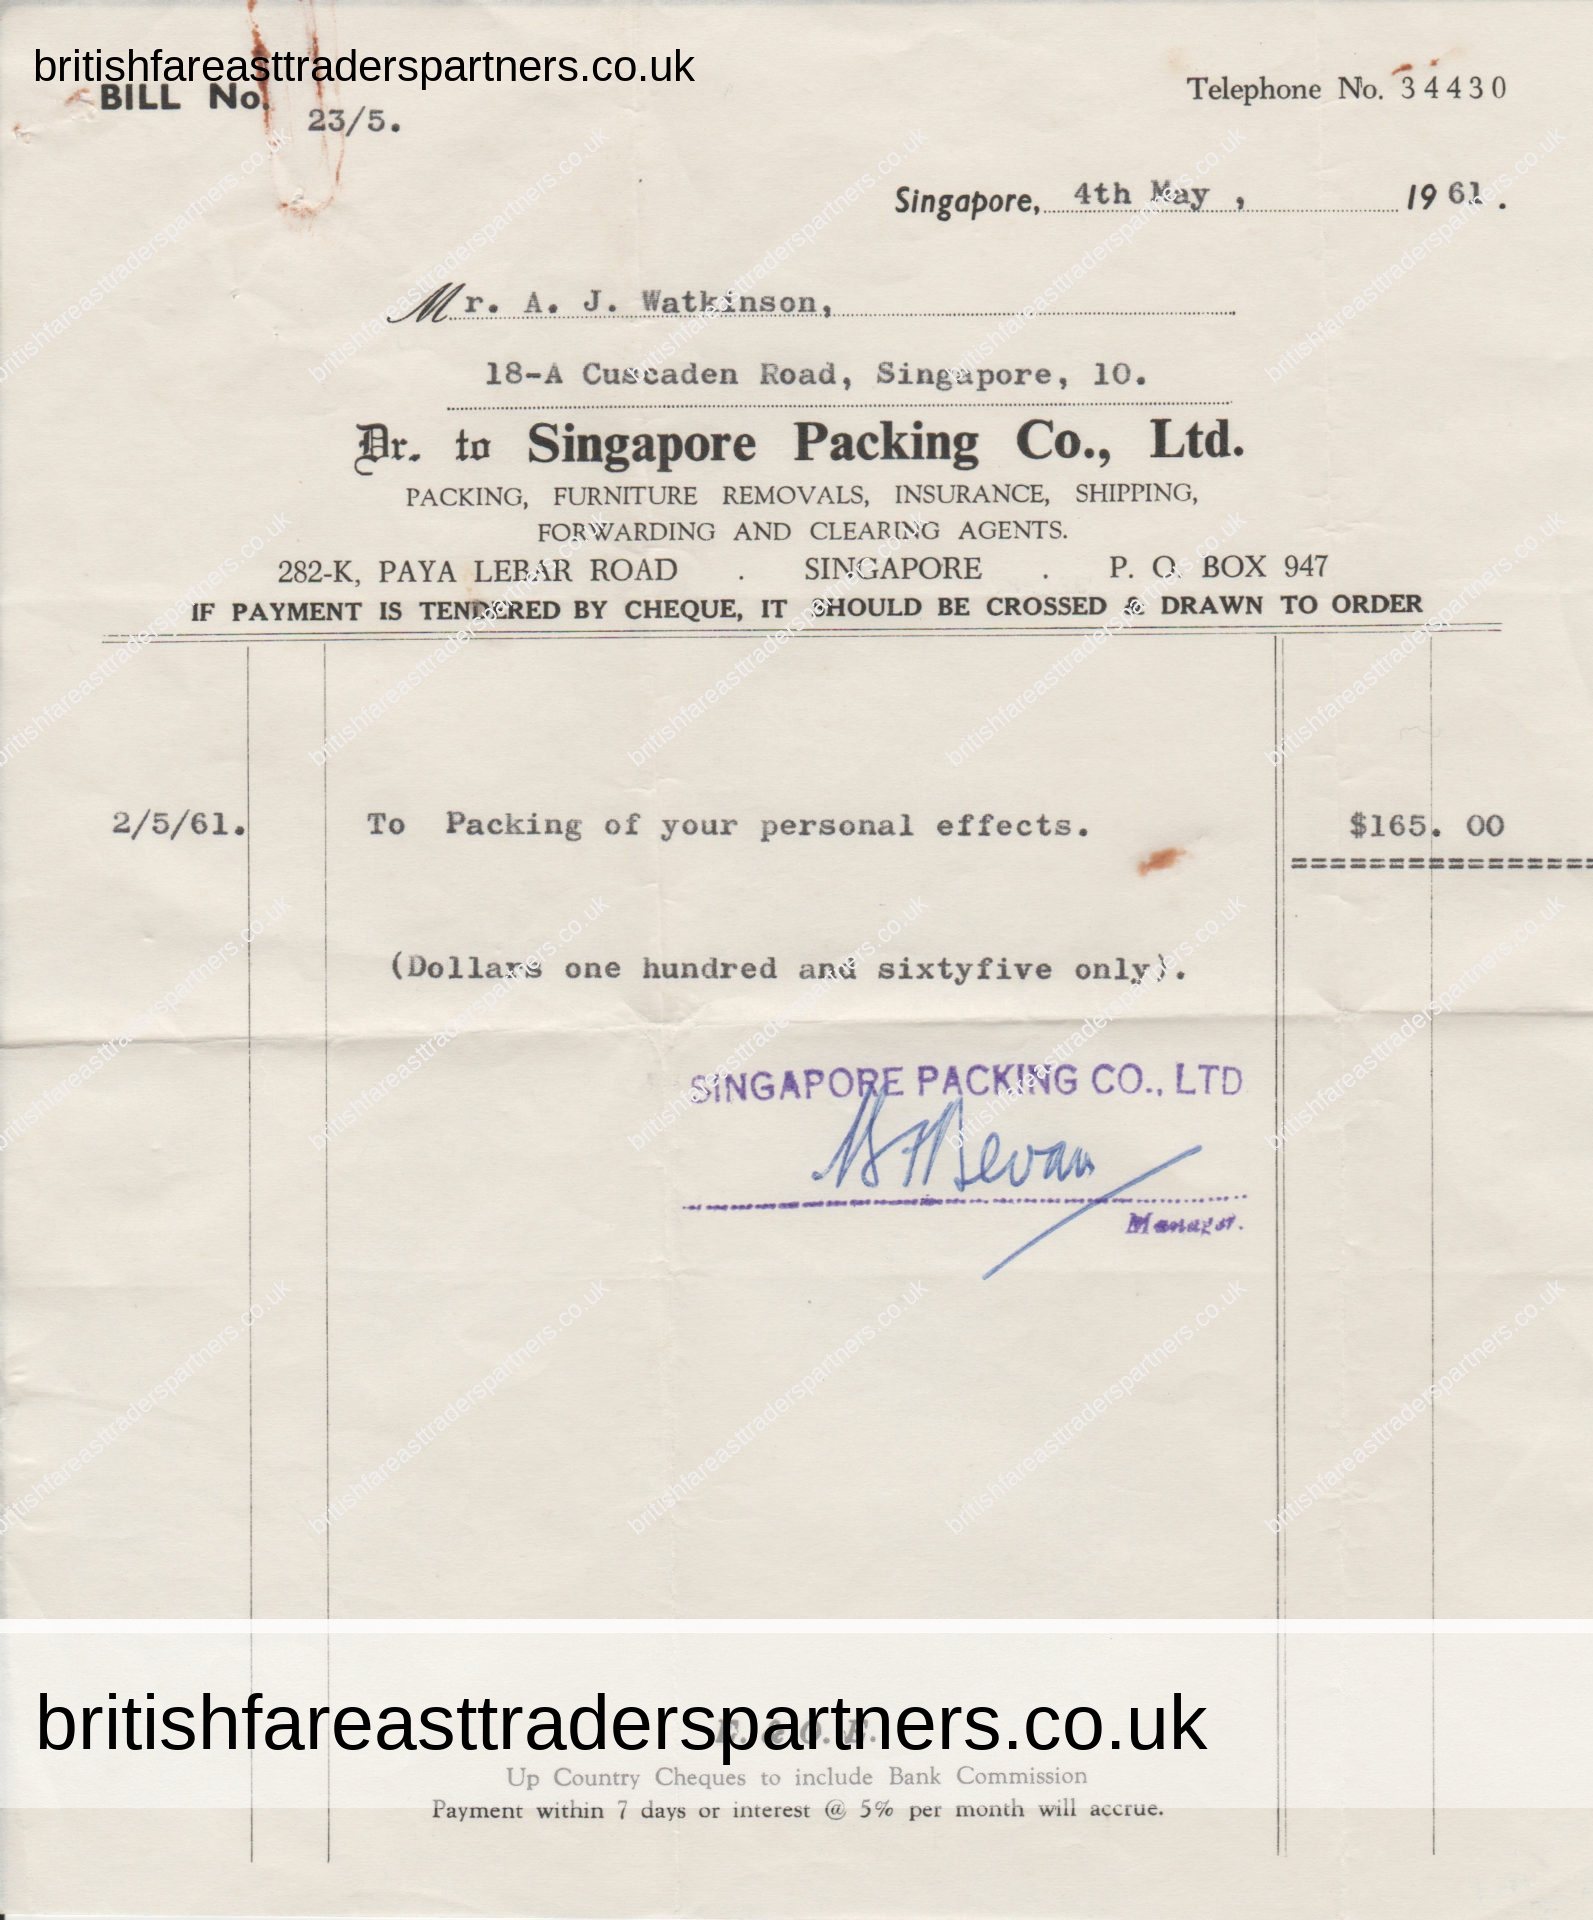 VINTAGE 1961 INVOICE / BILLHEAD “SINGAPORE PACKING CO. LTD.” PACKING, FURNITURE REMOVALS, INSURANCE, SHIPPING, FORWARDING AND CLEARING AGENTS COLLECTABLES | PAPER & EPHEMERA BUSINESS | COMPANIES | INDUSTRIES | SINGAPORE | BRITISH SINGAPORE | ASIA HERITAGE | HISTORY